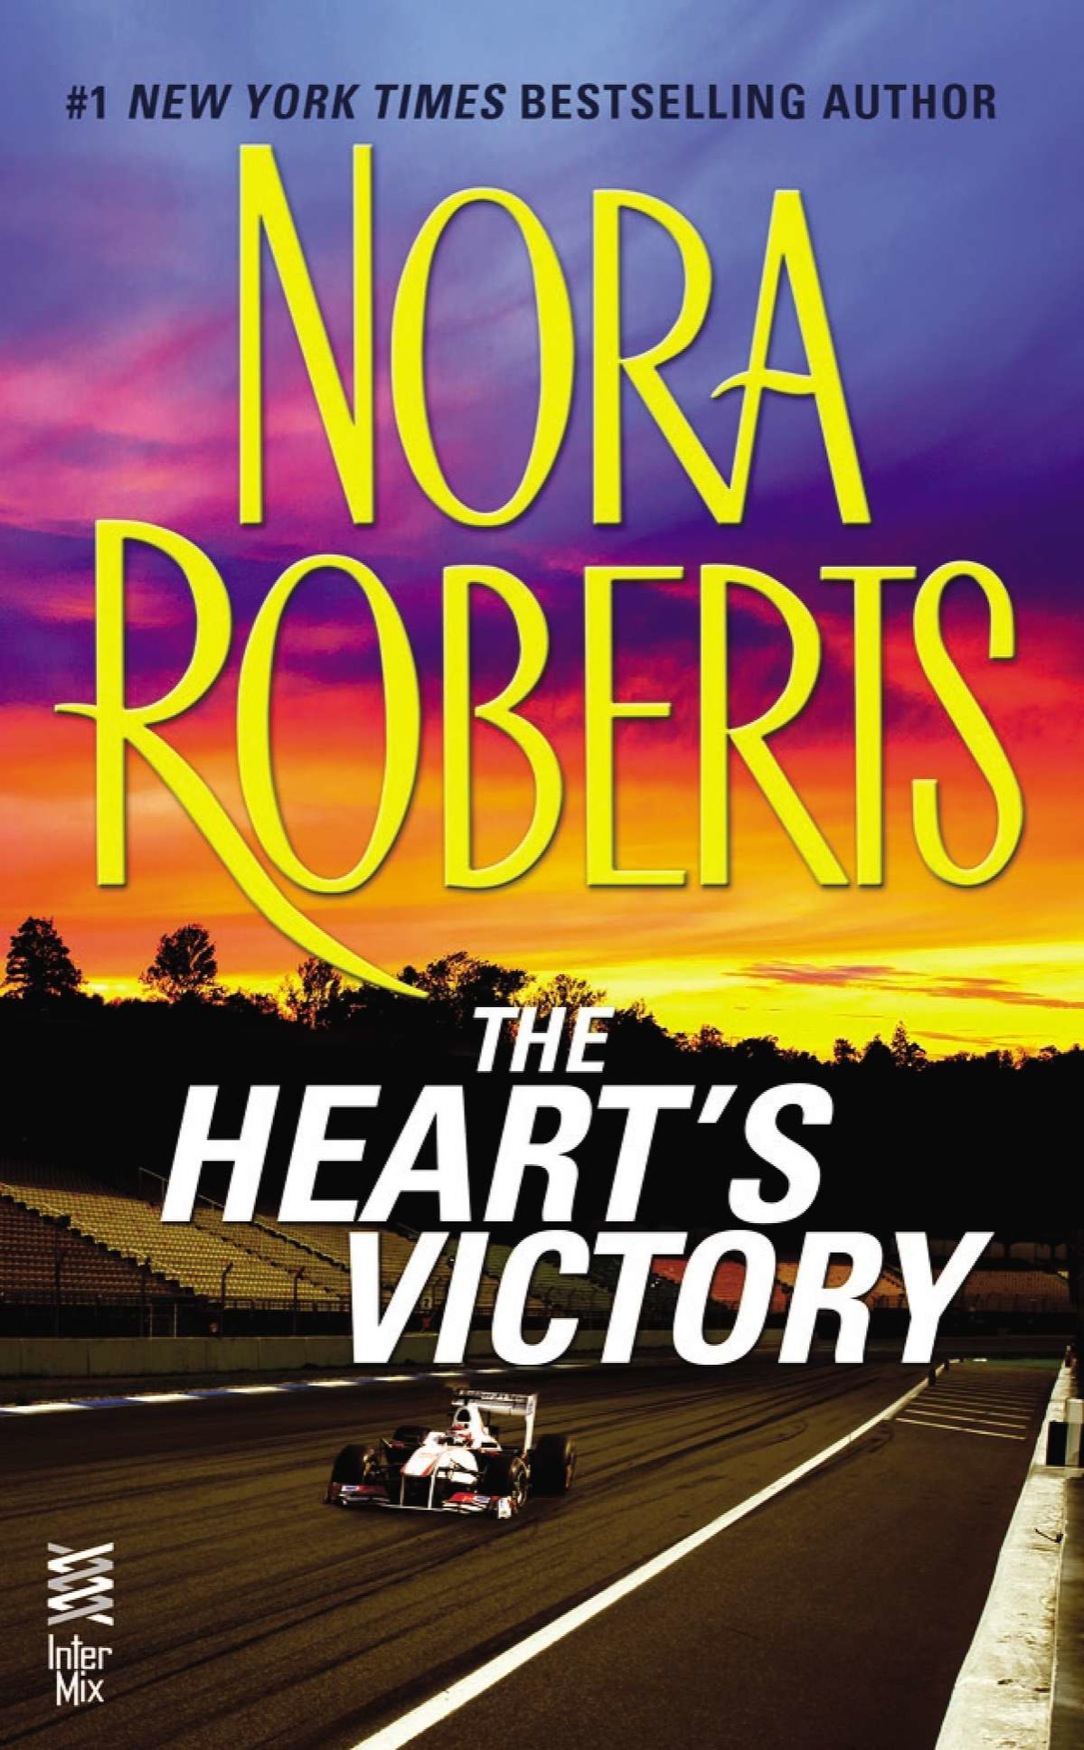 The Heart's Victory (2012) by Nora Roberts